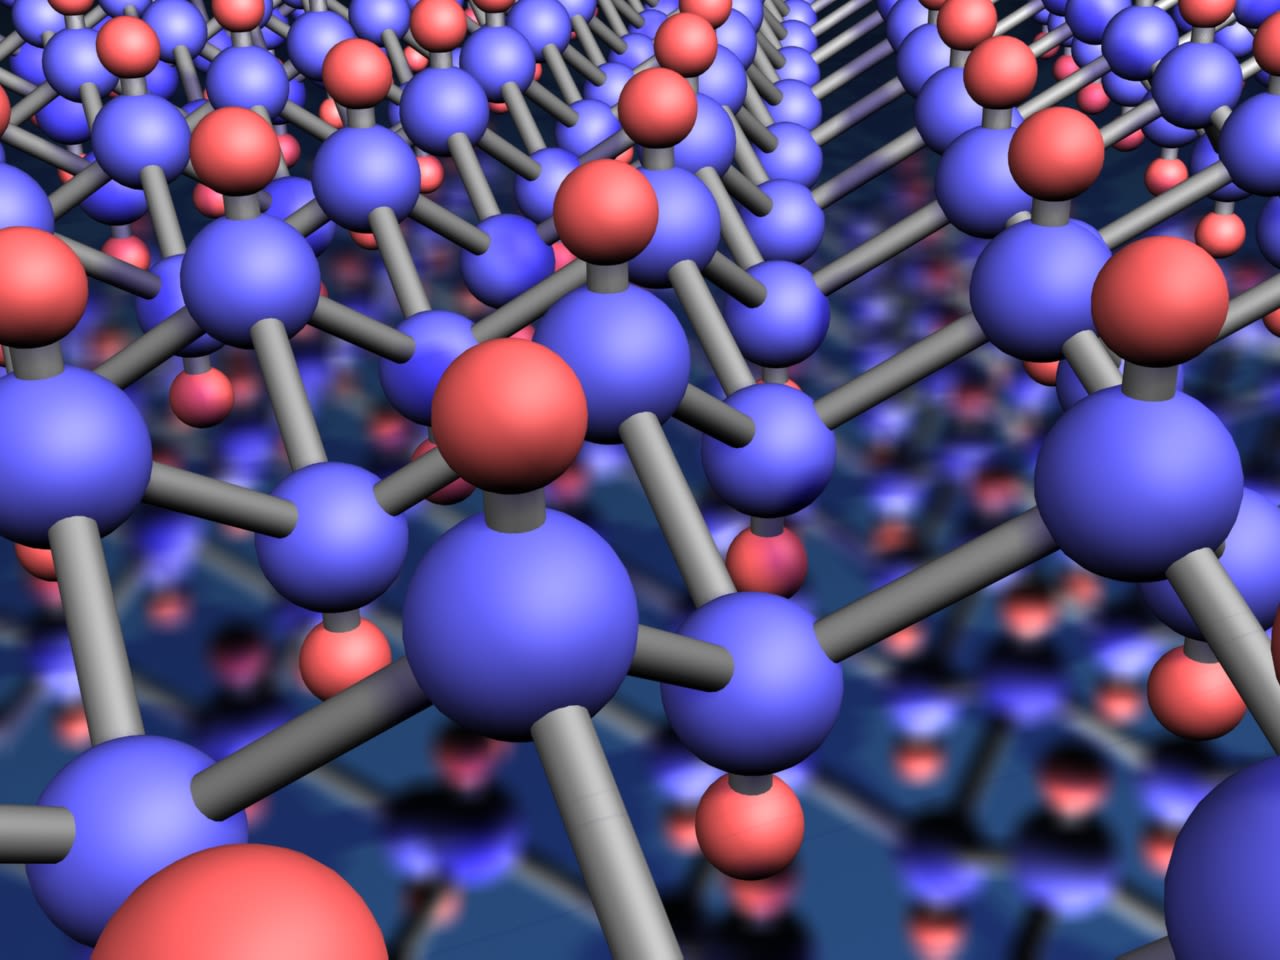 Since its discovery, graphene has spawned many associated products and applications. Pictured is the molecular structure of a graphene crystal - a novel two-dimensional material obtained from graphene (a monolayer of carbon atoms) by attaching hydrogen atoms (red) to each carbon atoms (blue) in the crystal.